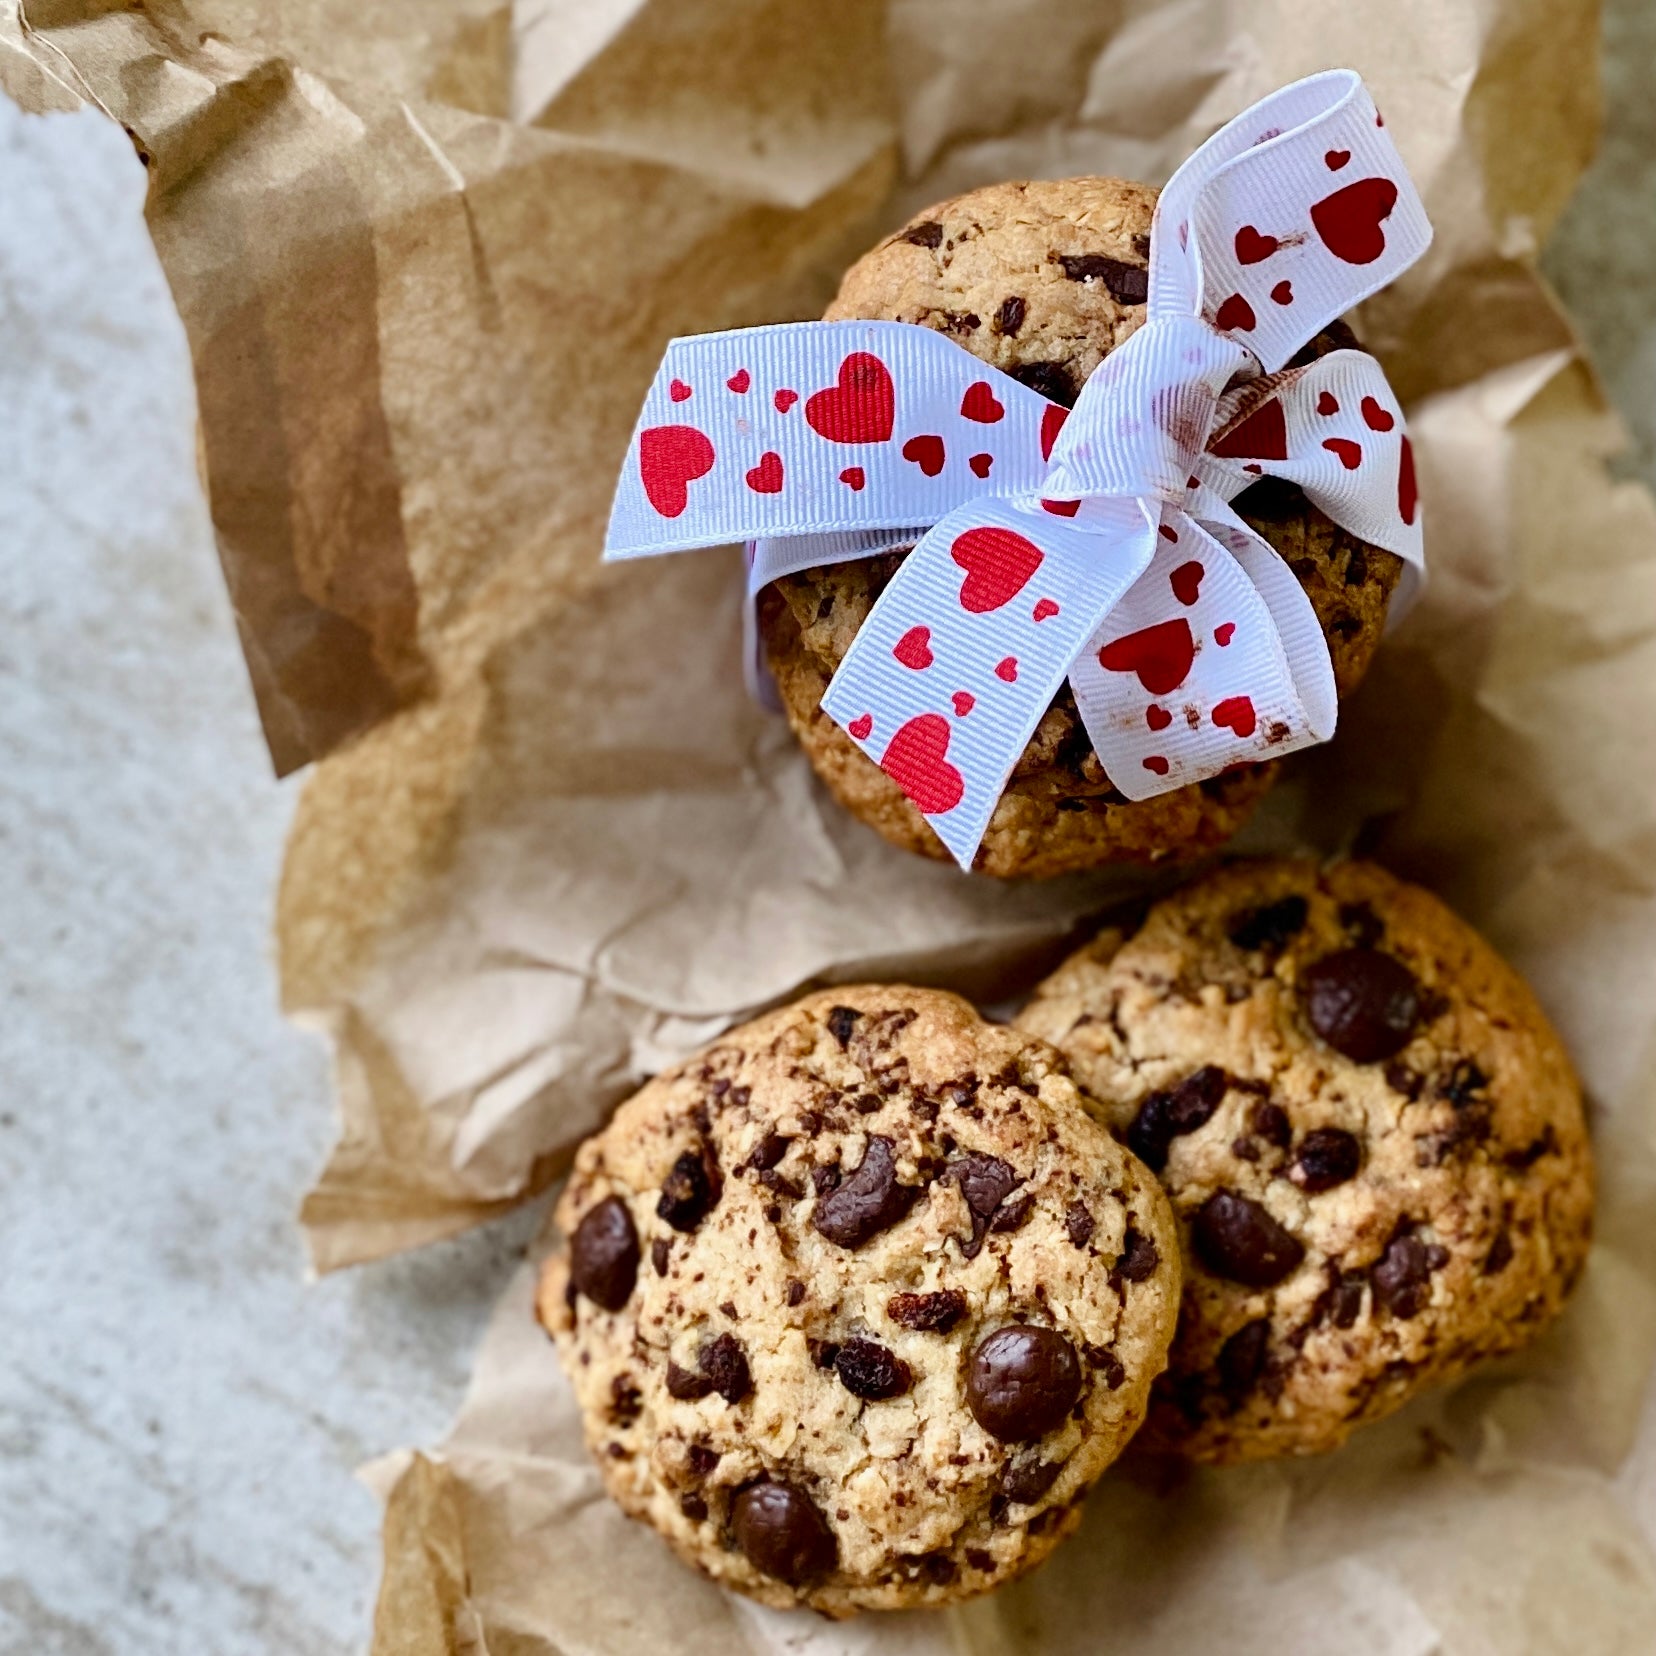 Chocolate Chip Cookies with a stack behind wrapped with white ribbon with red hearts. The cookies are on crumbled brown paper